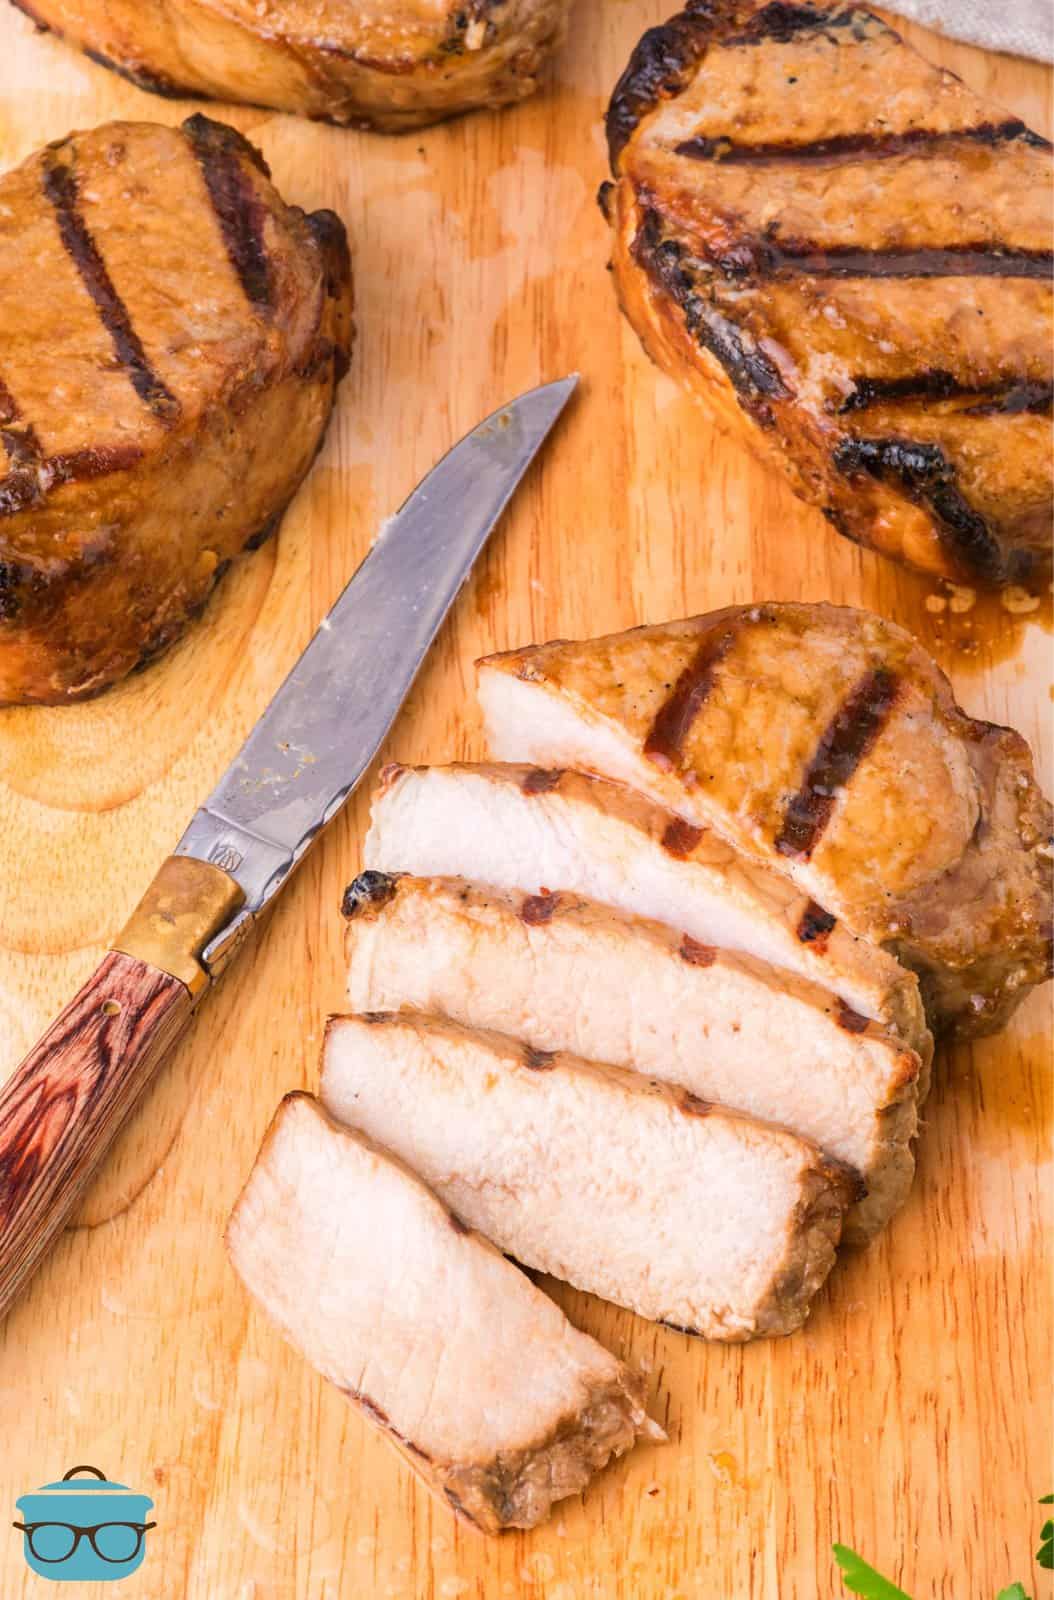 A cutting board with a knife next to a cut up Grilled Pork Chop.